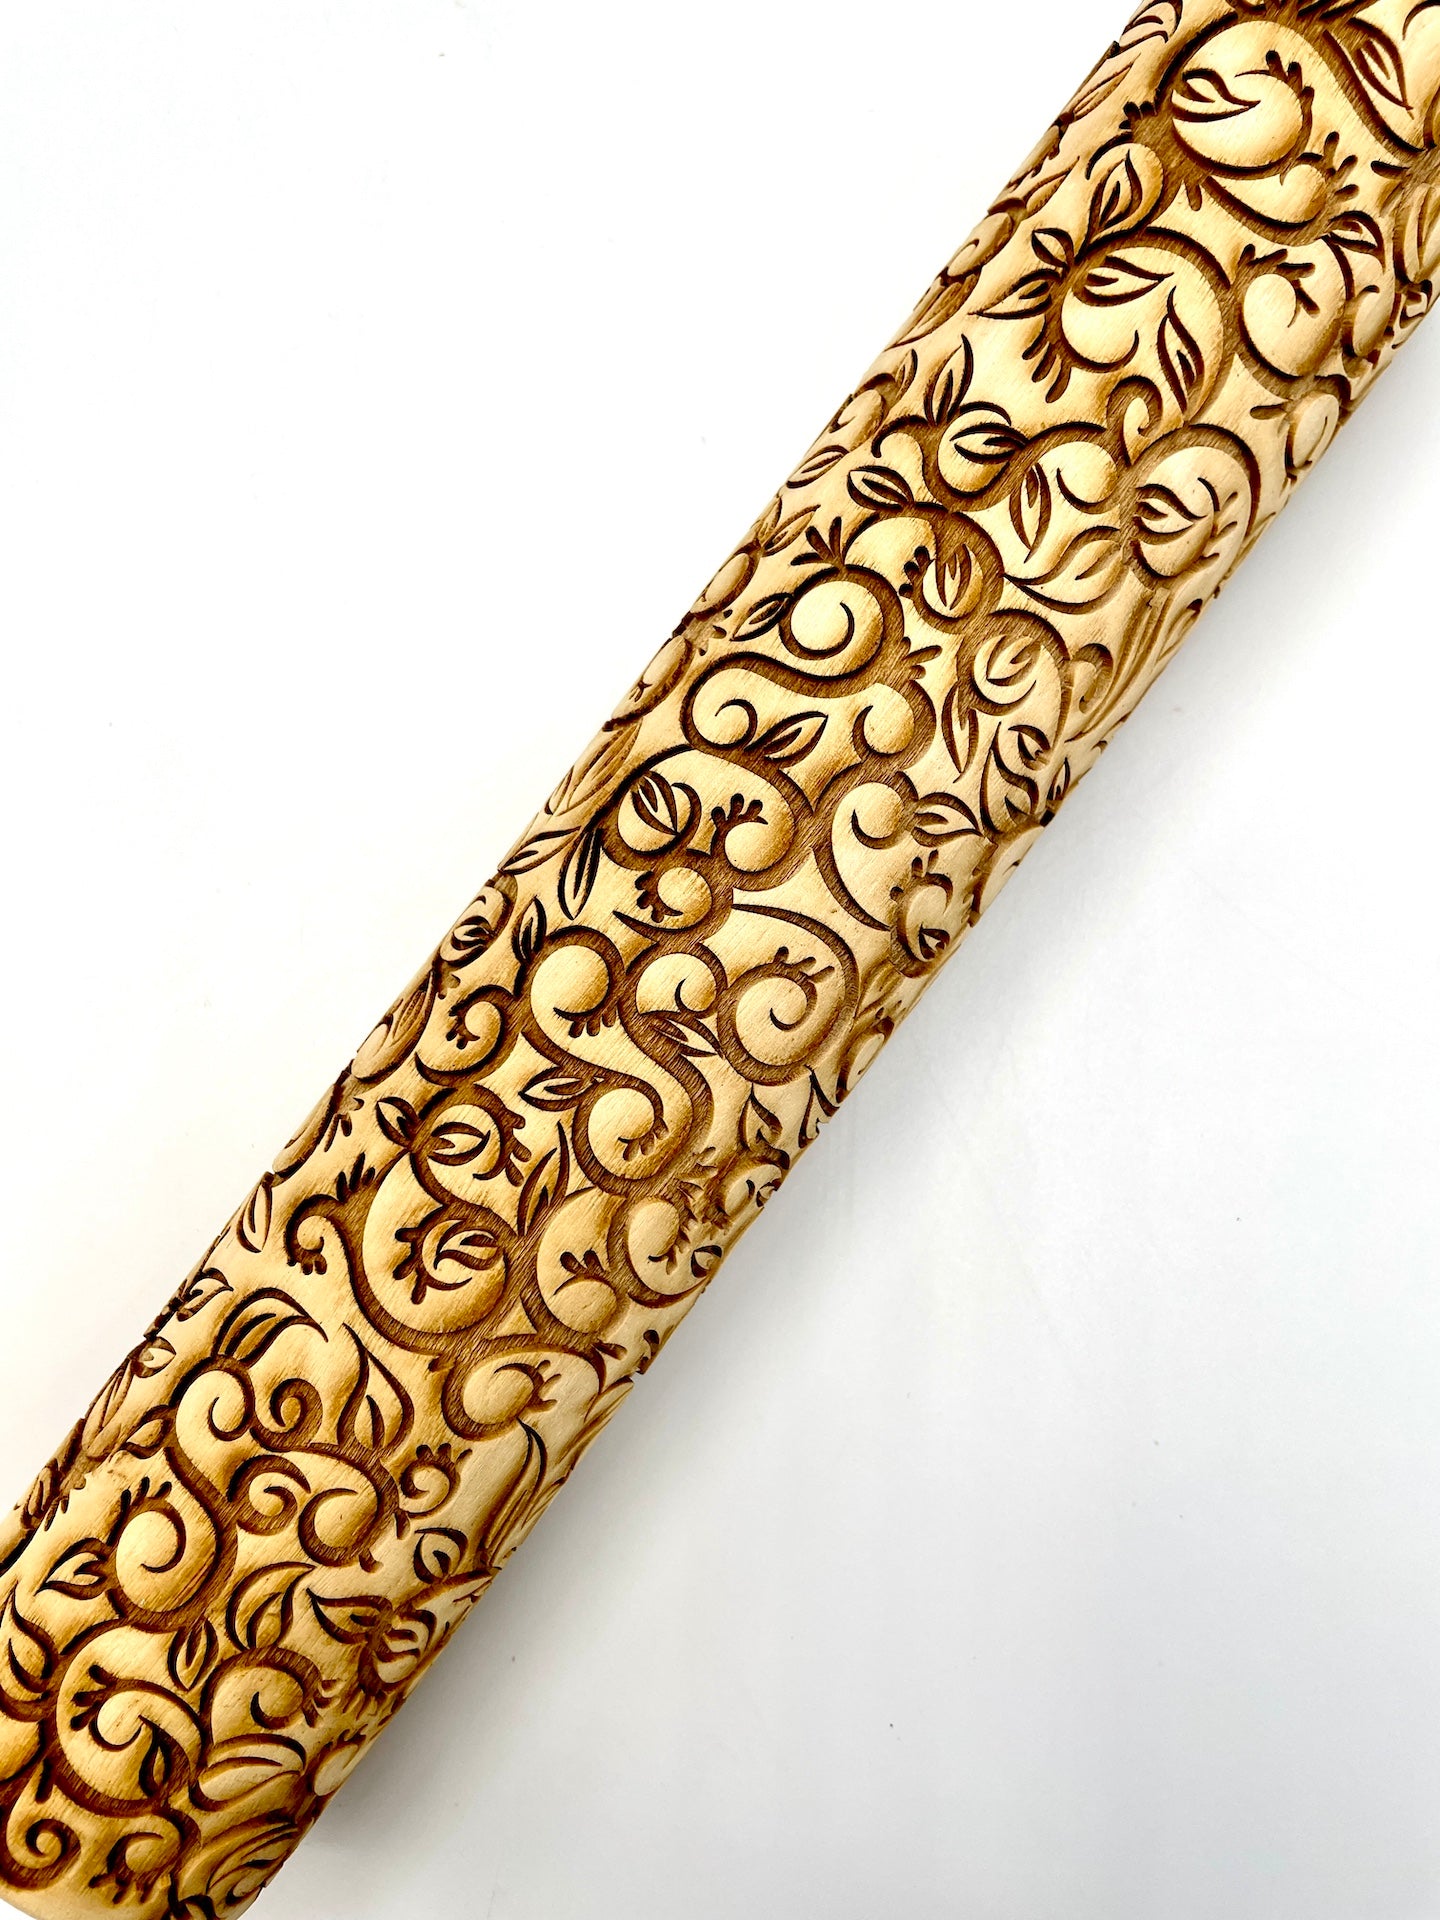 Leaves & Vines Textured Rolling Pin